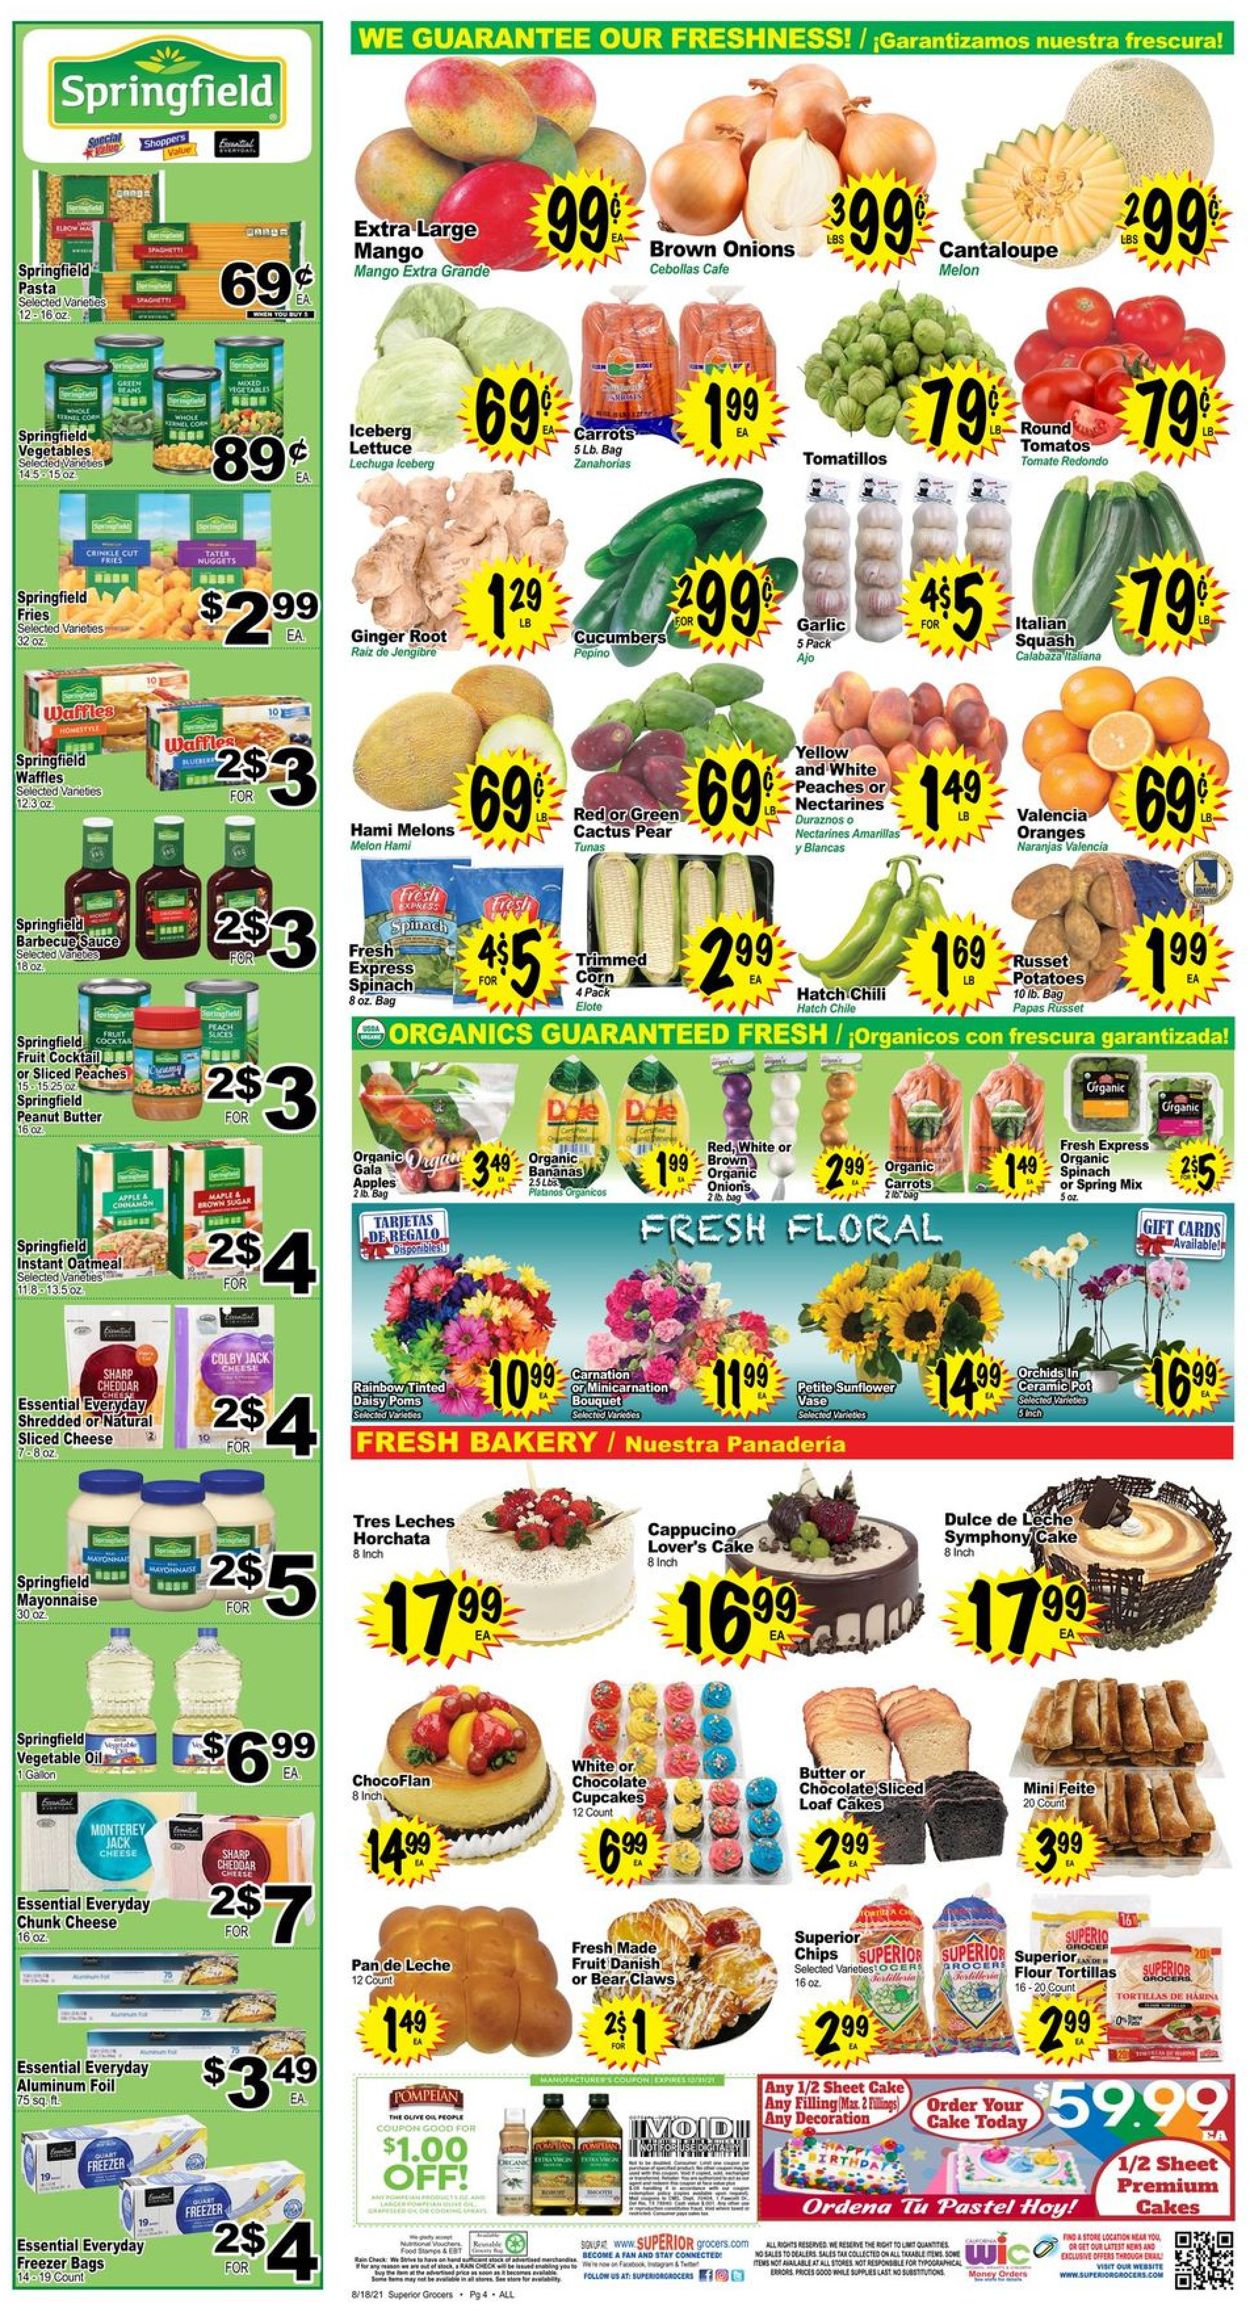 Catalogue Superior Grocers from 08/18/2021